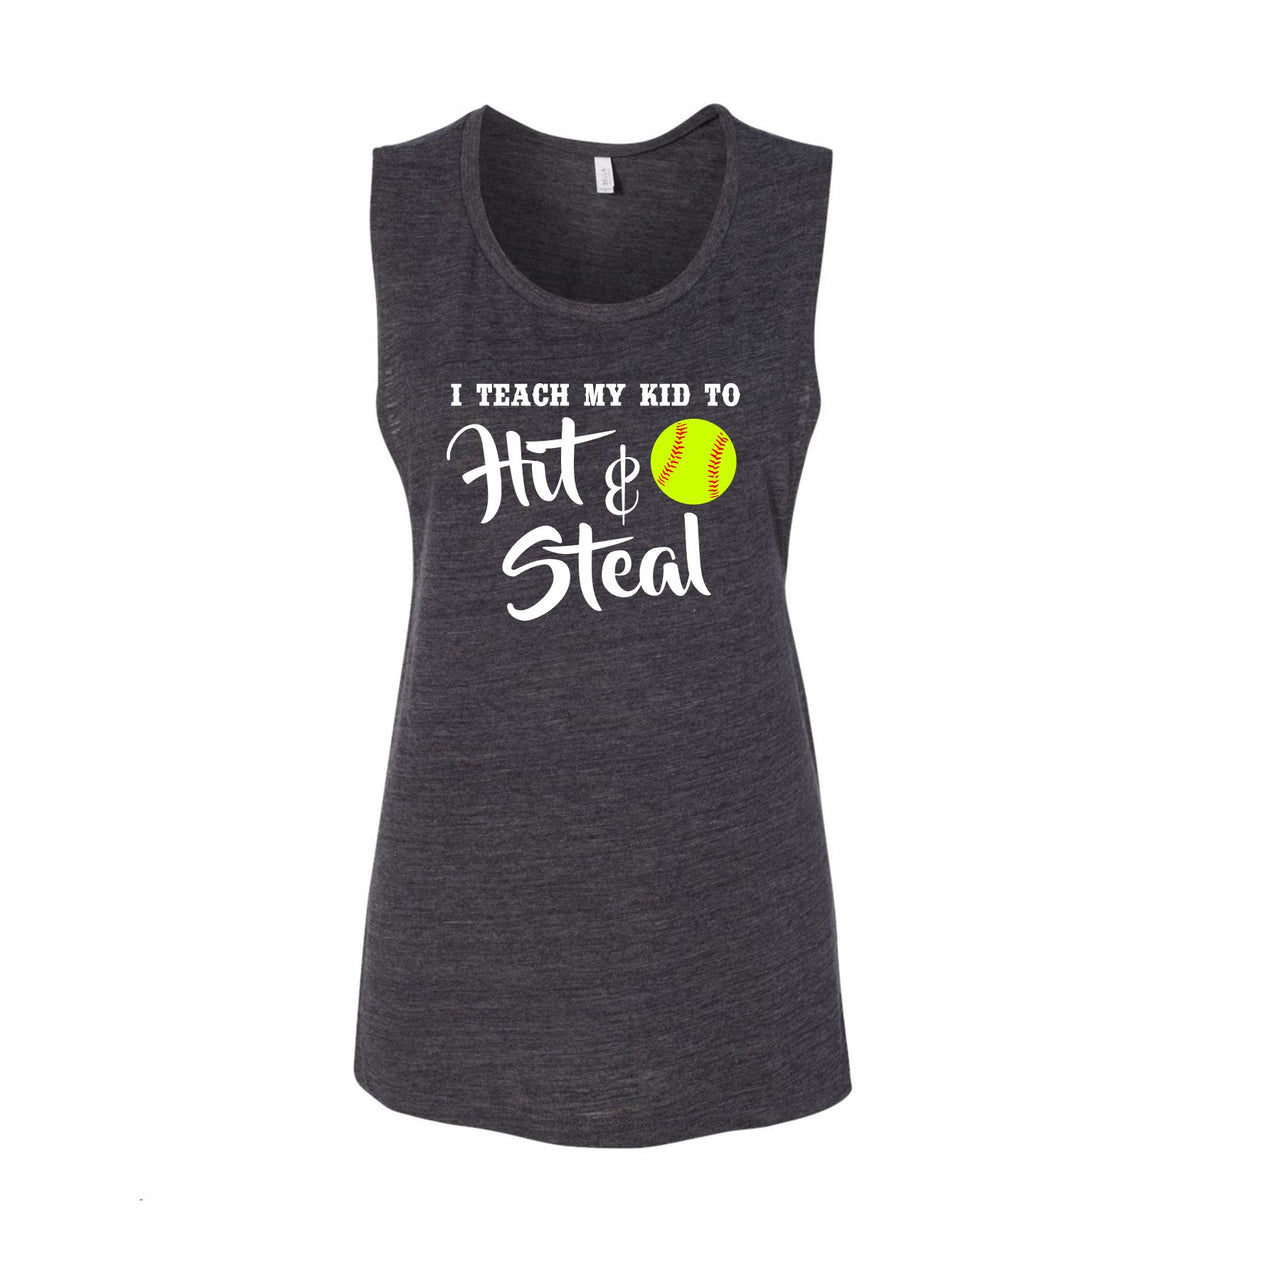 I Teach My Kid To Hit & Steal - Softball (Size Small Available)